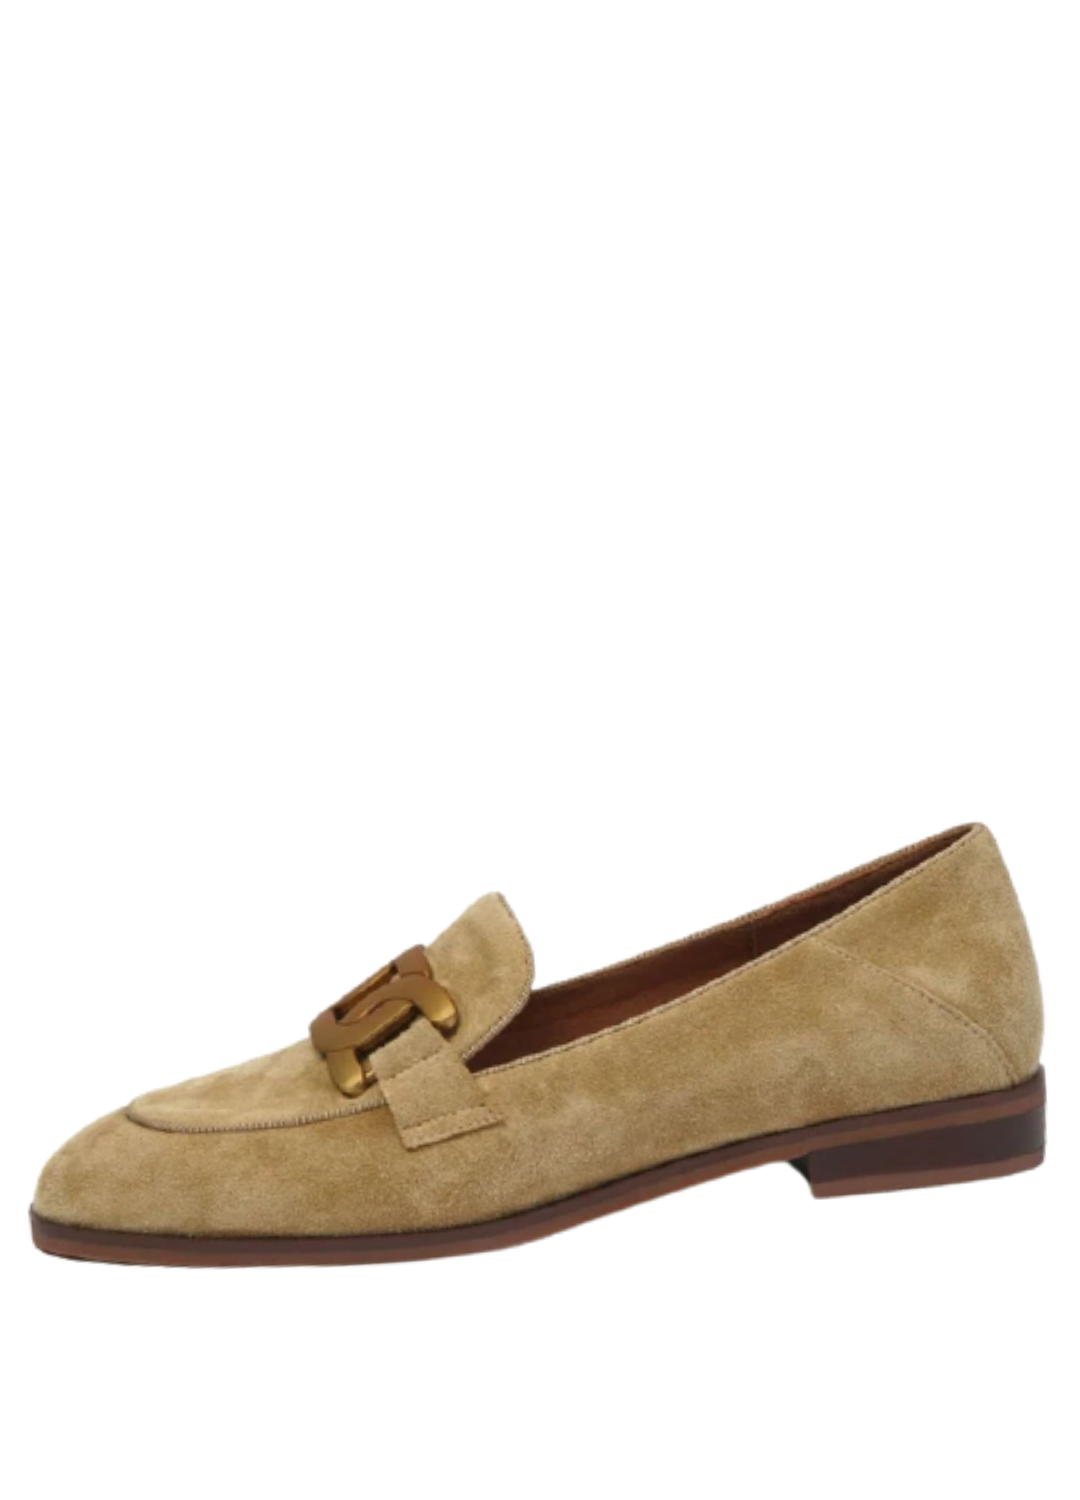 USS Shoes Karoxy Women's Leather Loafer | ussshoes.com – USS® Shoes